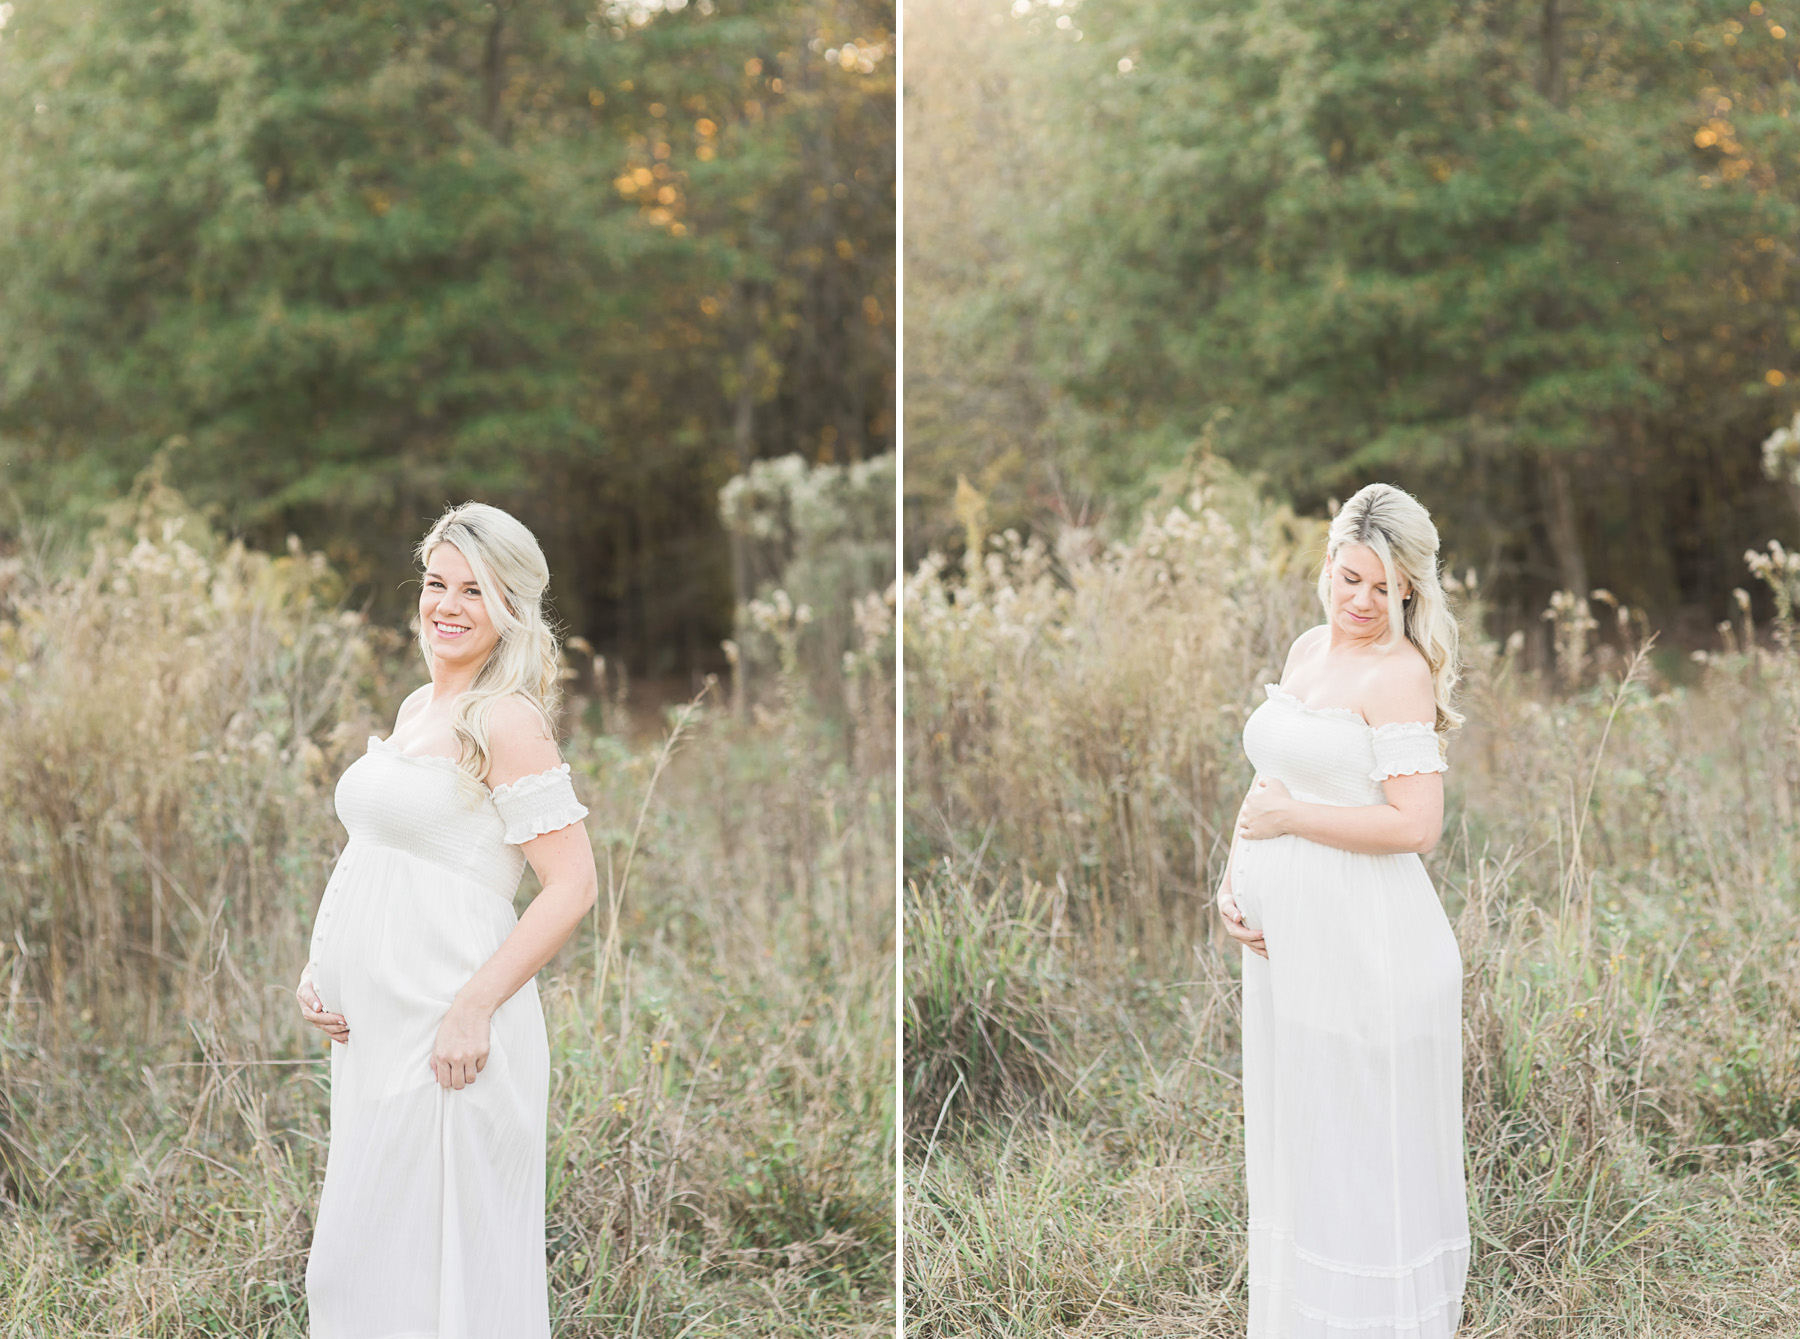 Pregnant woman outside in a field | Benefits of prenatal yoga | Anna Wisjo Photography